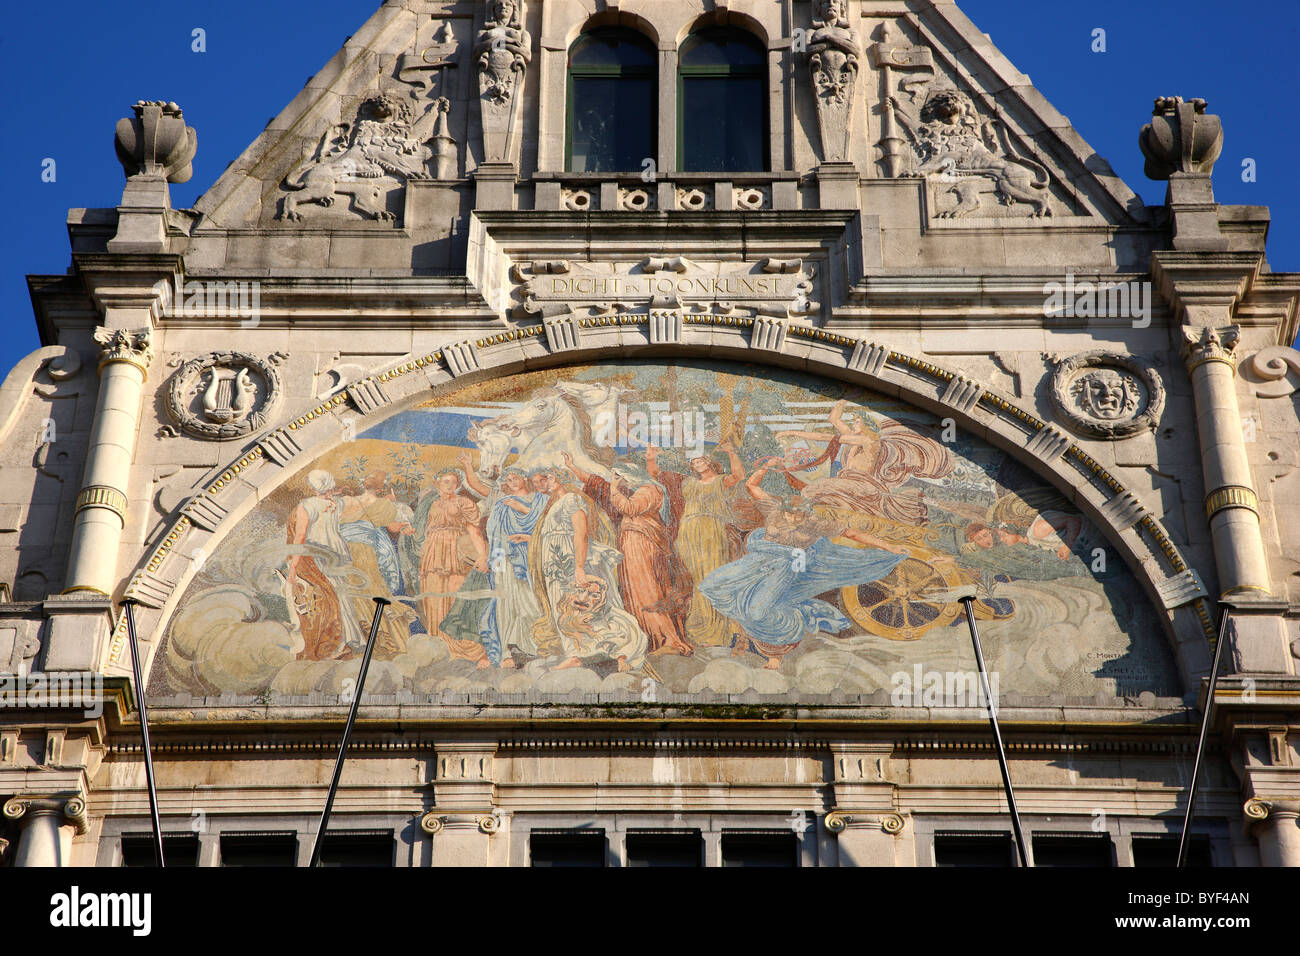 Facade, mosaic of an old theater at Sint-Baafsplein, square. Ghent, East-Flanders, Belgium, Europe Stock Photo